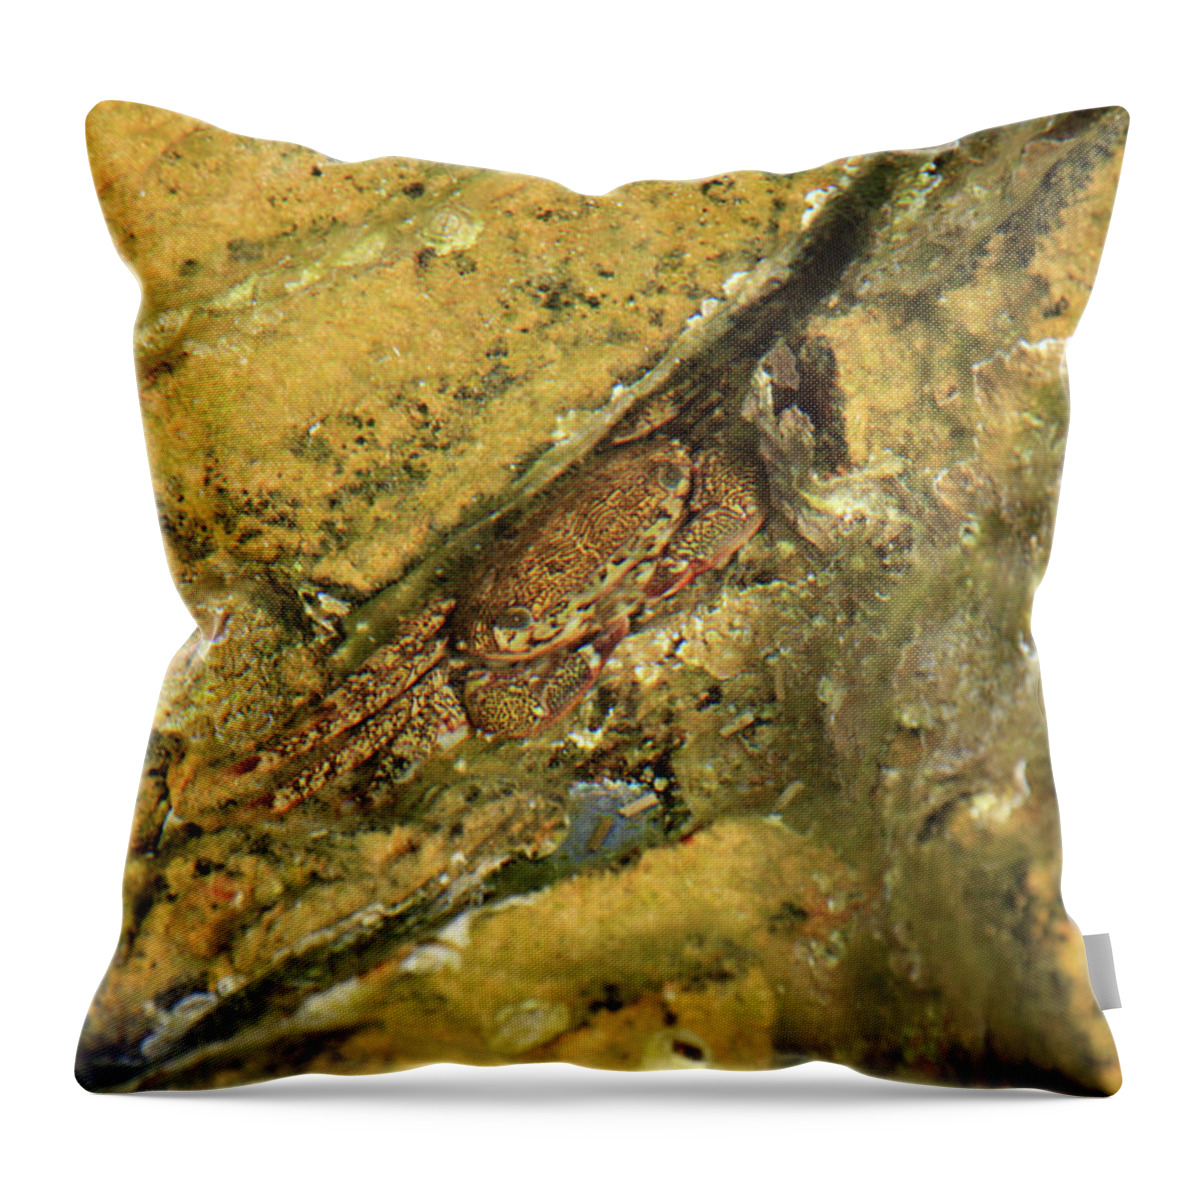 Mare Throw Pillow featuring the photograph Mimetismo by Simone Lucchesi